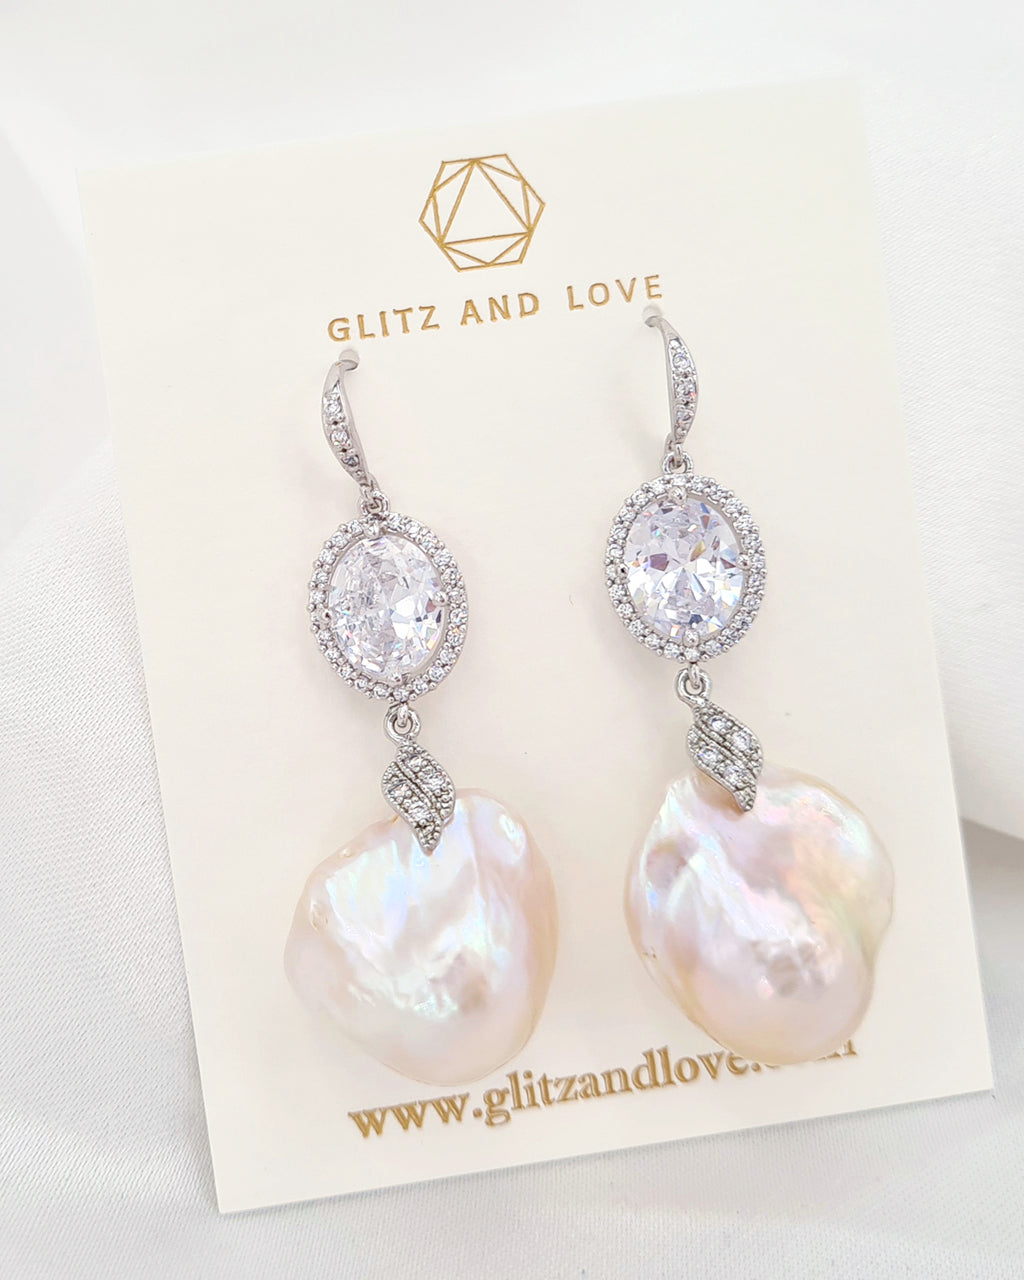 Statement White Baroque Pearl Oval Crystal Chandelier Earrings - Wedding Bridal Jewelry for Brides and Bridesmaids | Baroque Pearl Jewelry for Mother's Day Gifts